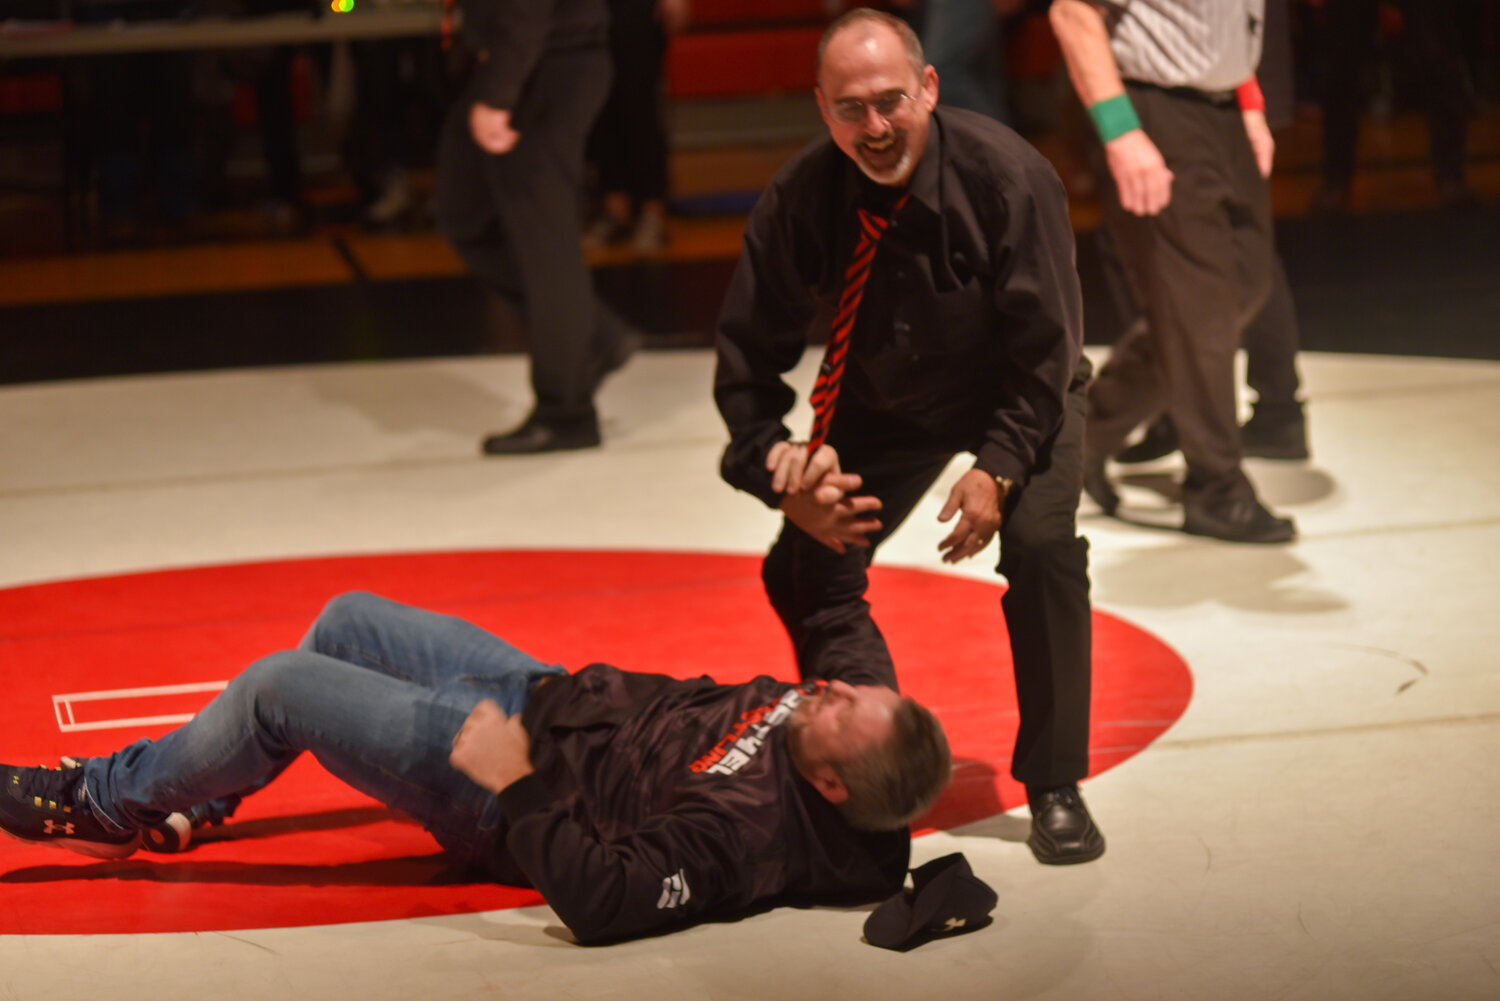 Yelm's head coach Gaylord Strand celebrates tossing Bethel's head coach Matt Lininger after the "Bad to the Bone" dual on Jan. 23 between the Tornados and the Bison.